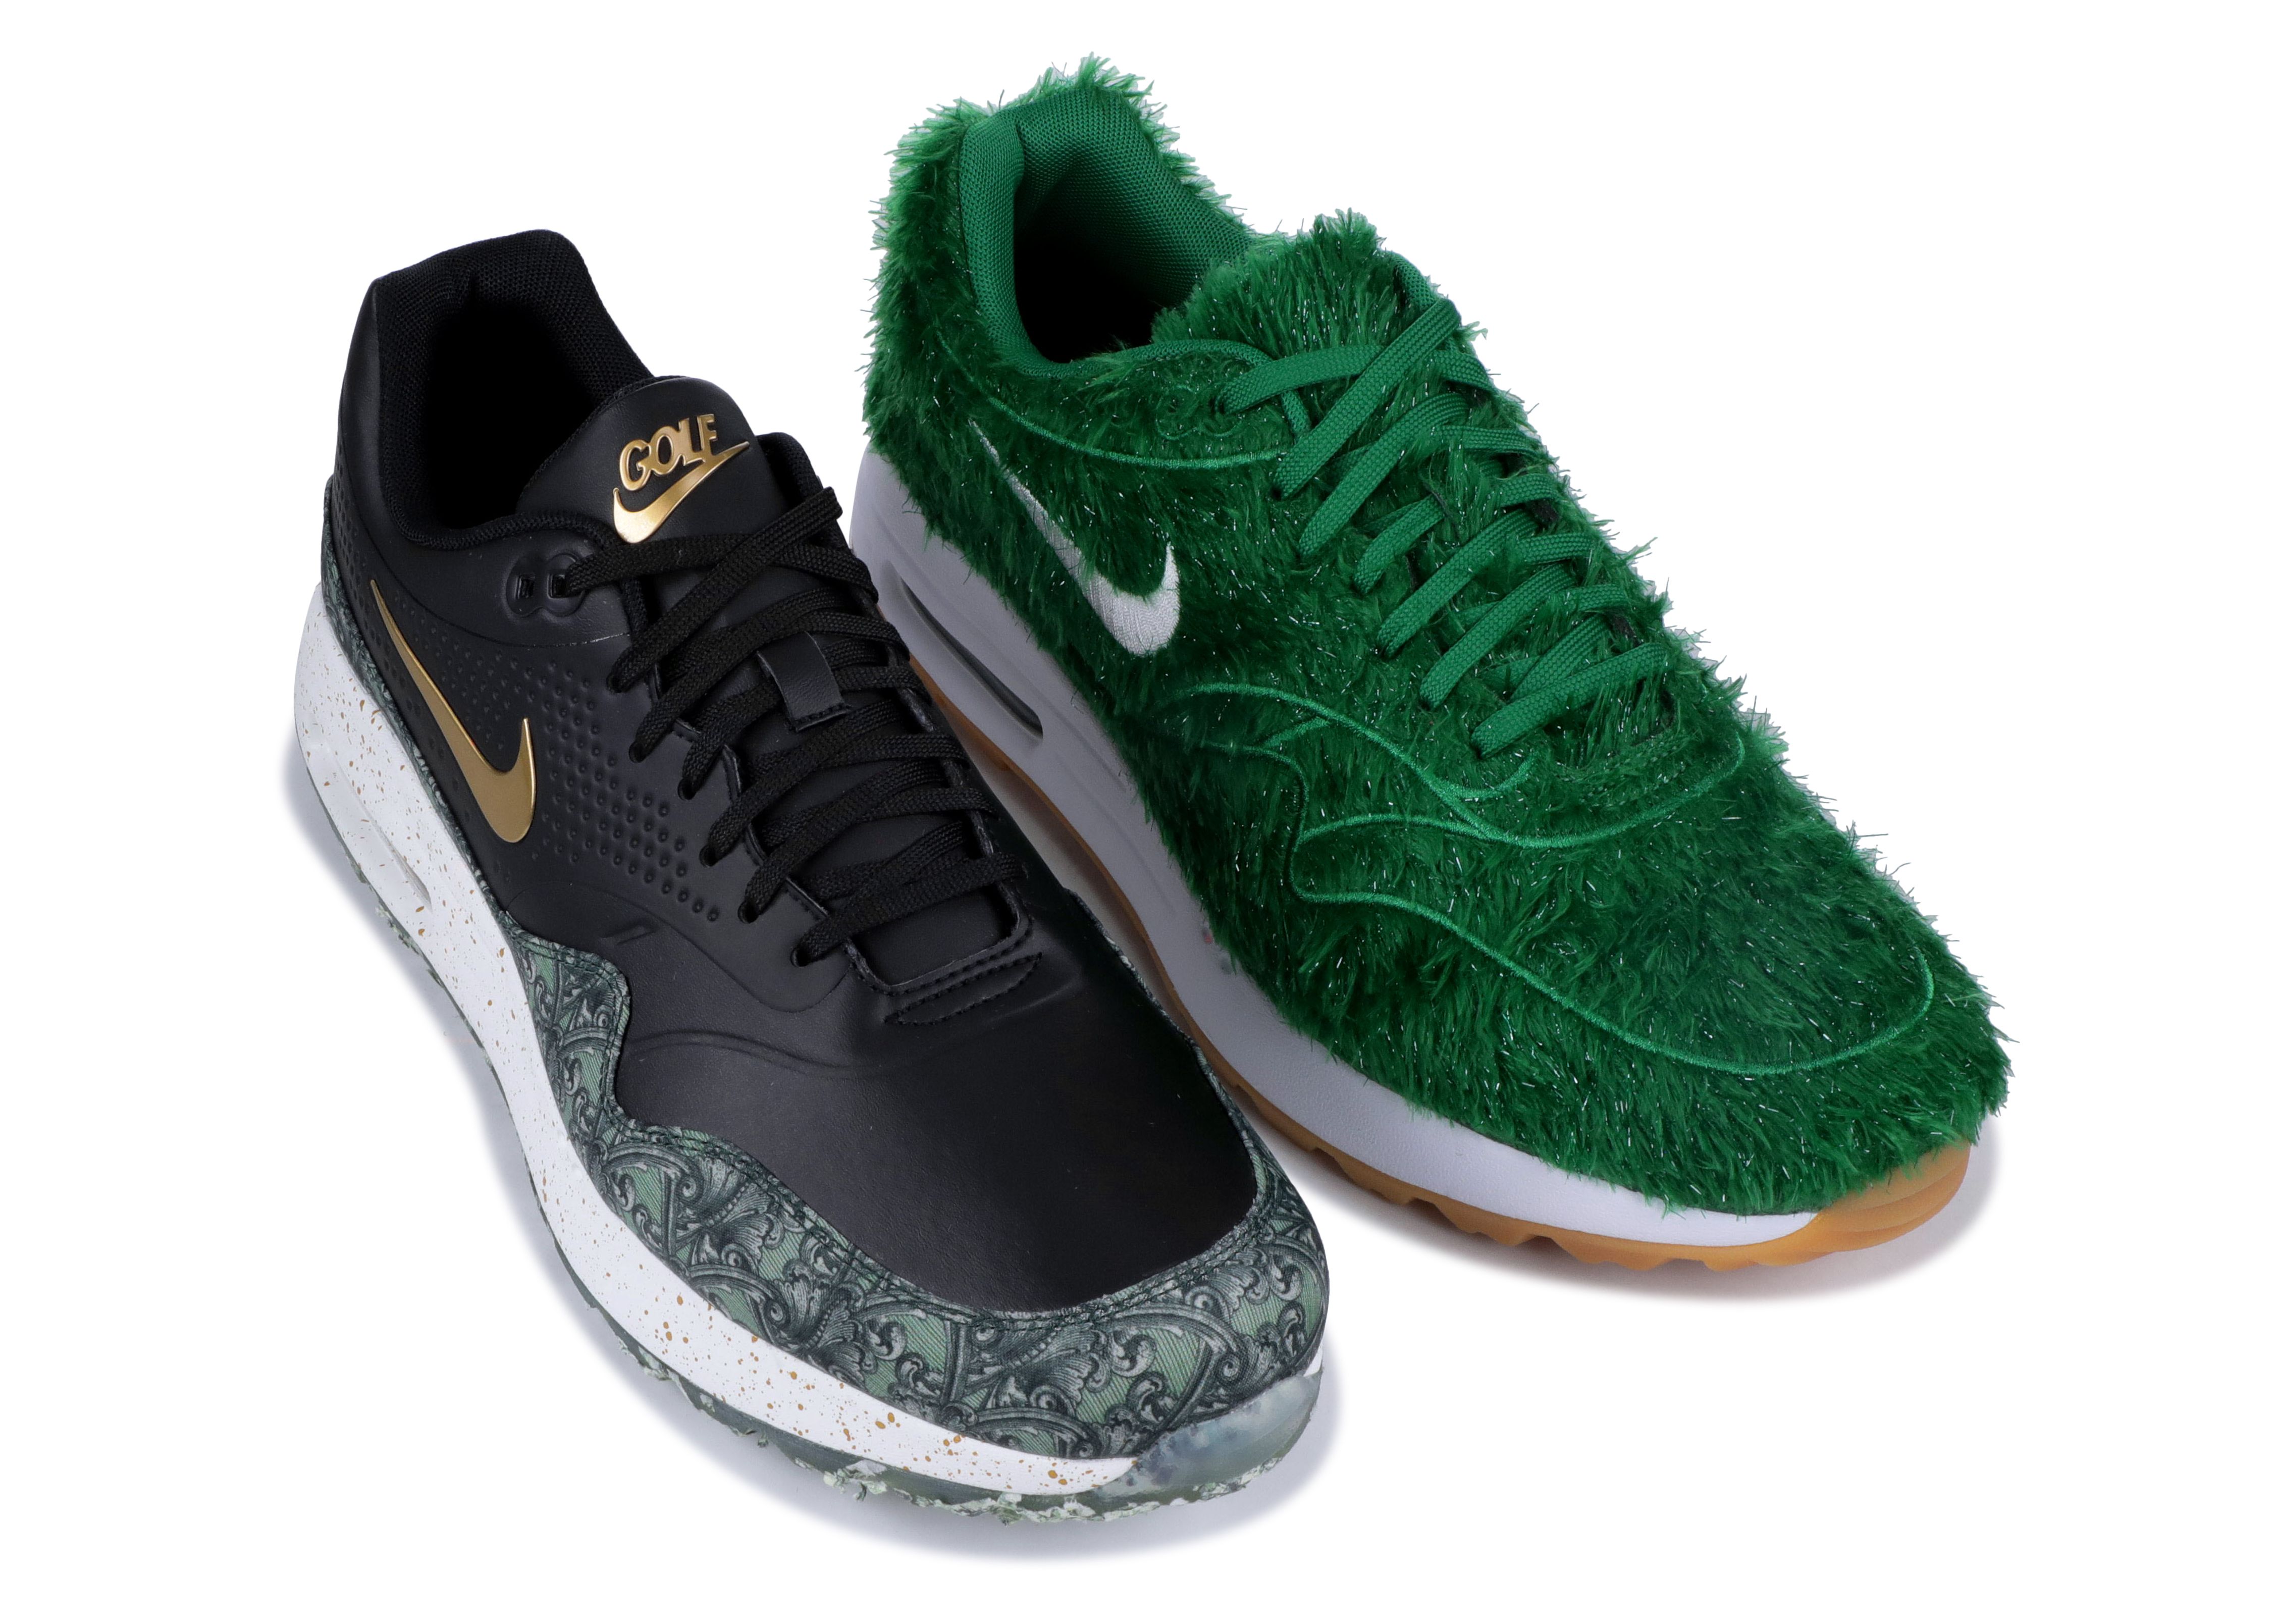 Кроссовки Nike Air Max 1 Golf Nrg 'Grass & Payday' Pack, зеленый men s classic golf shoes non slip grass golf training sneakers men s comfortable golf walking sneakers grass golf shoes for men